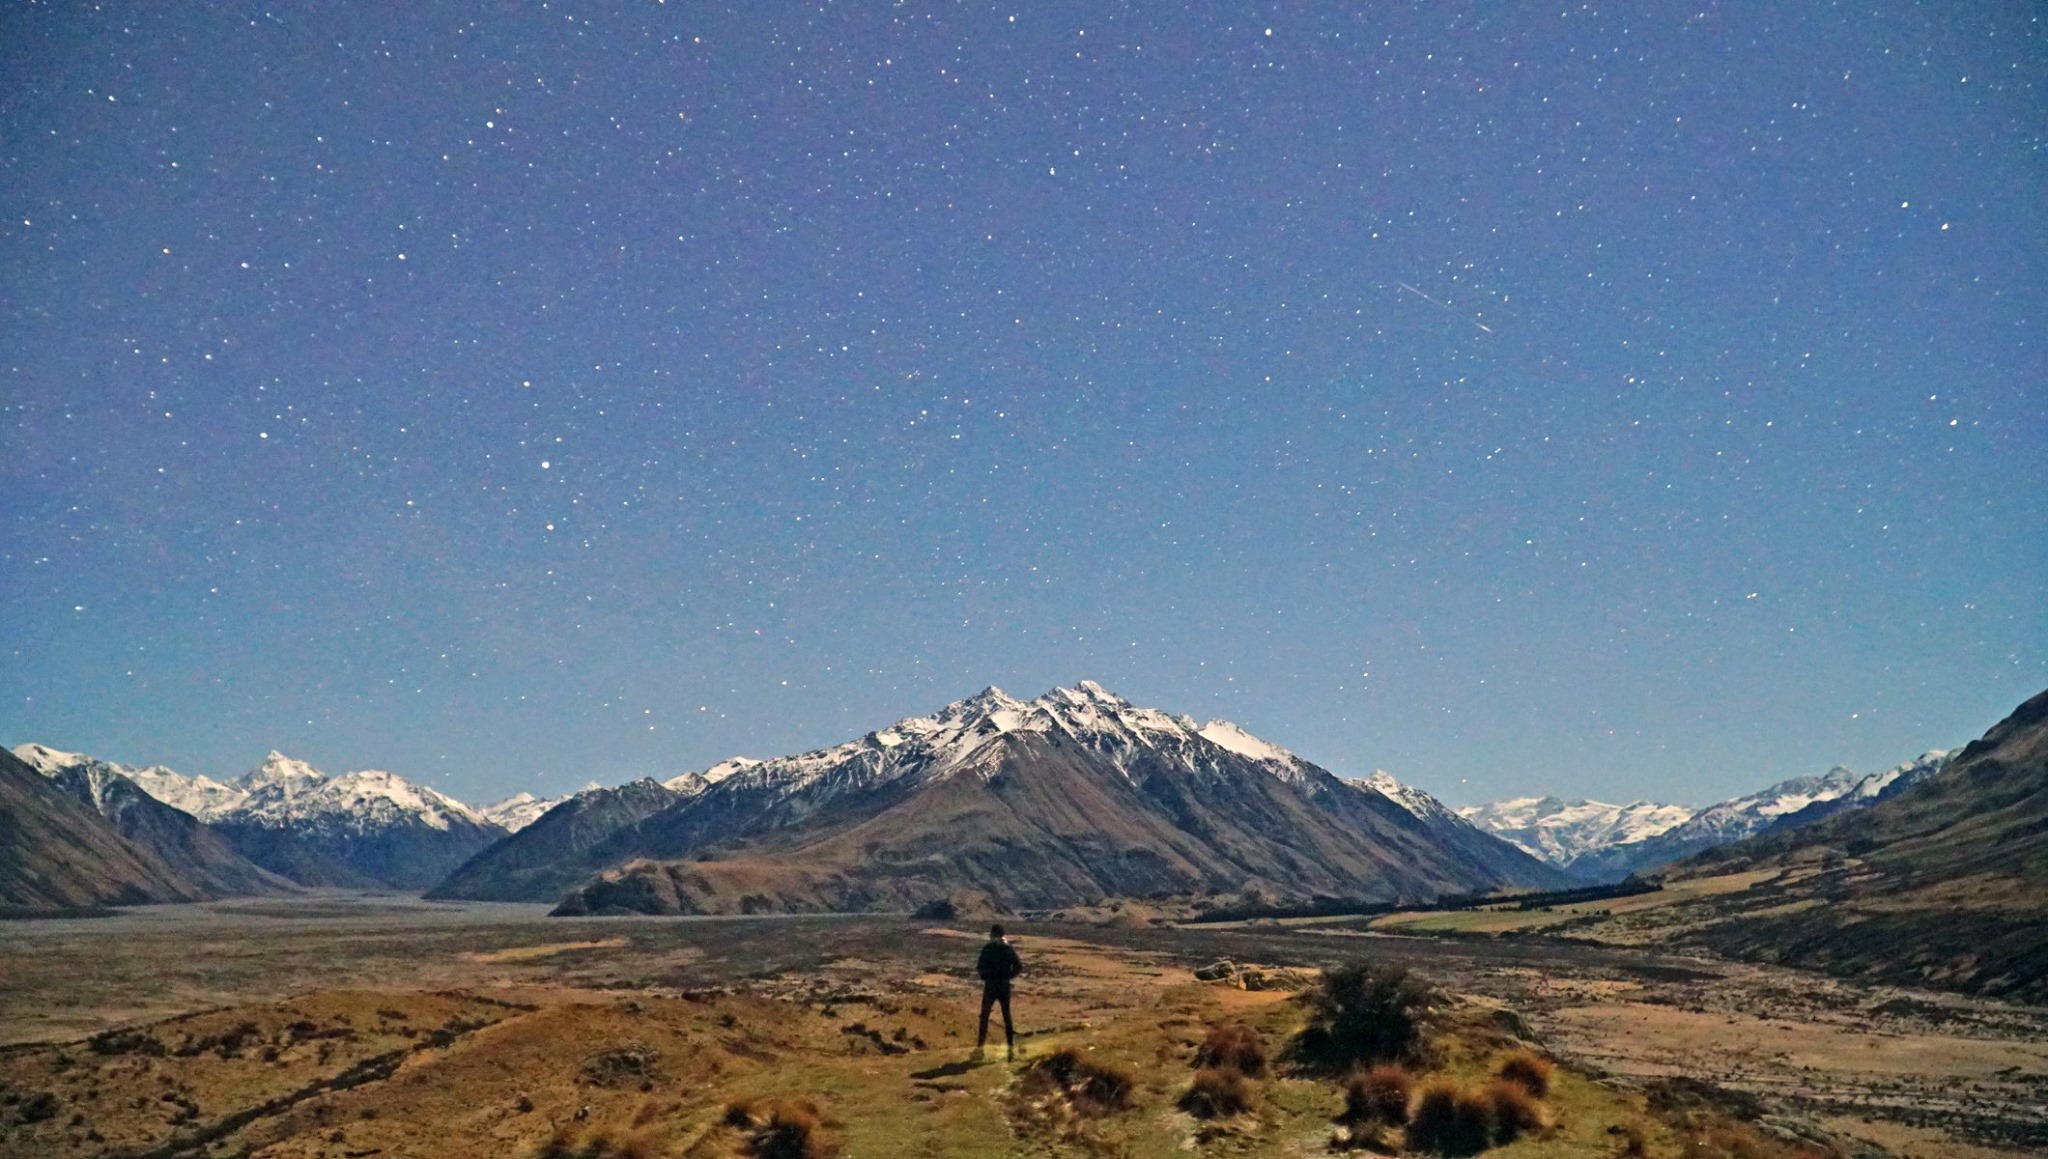 man looks at snowcapped mountains, grassland and stars